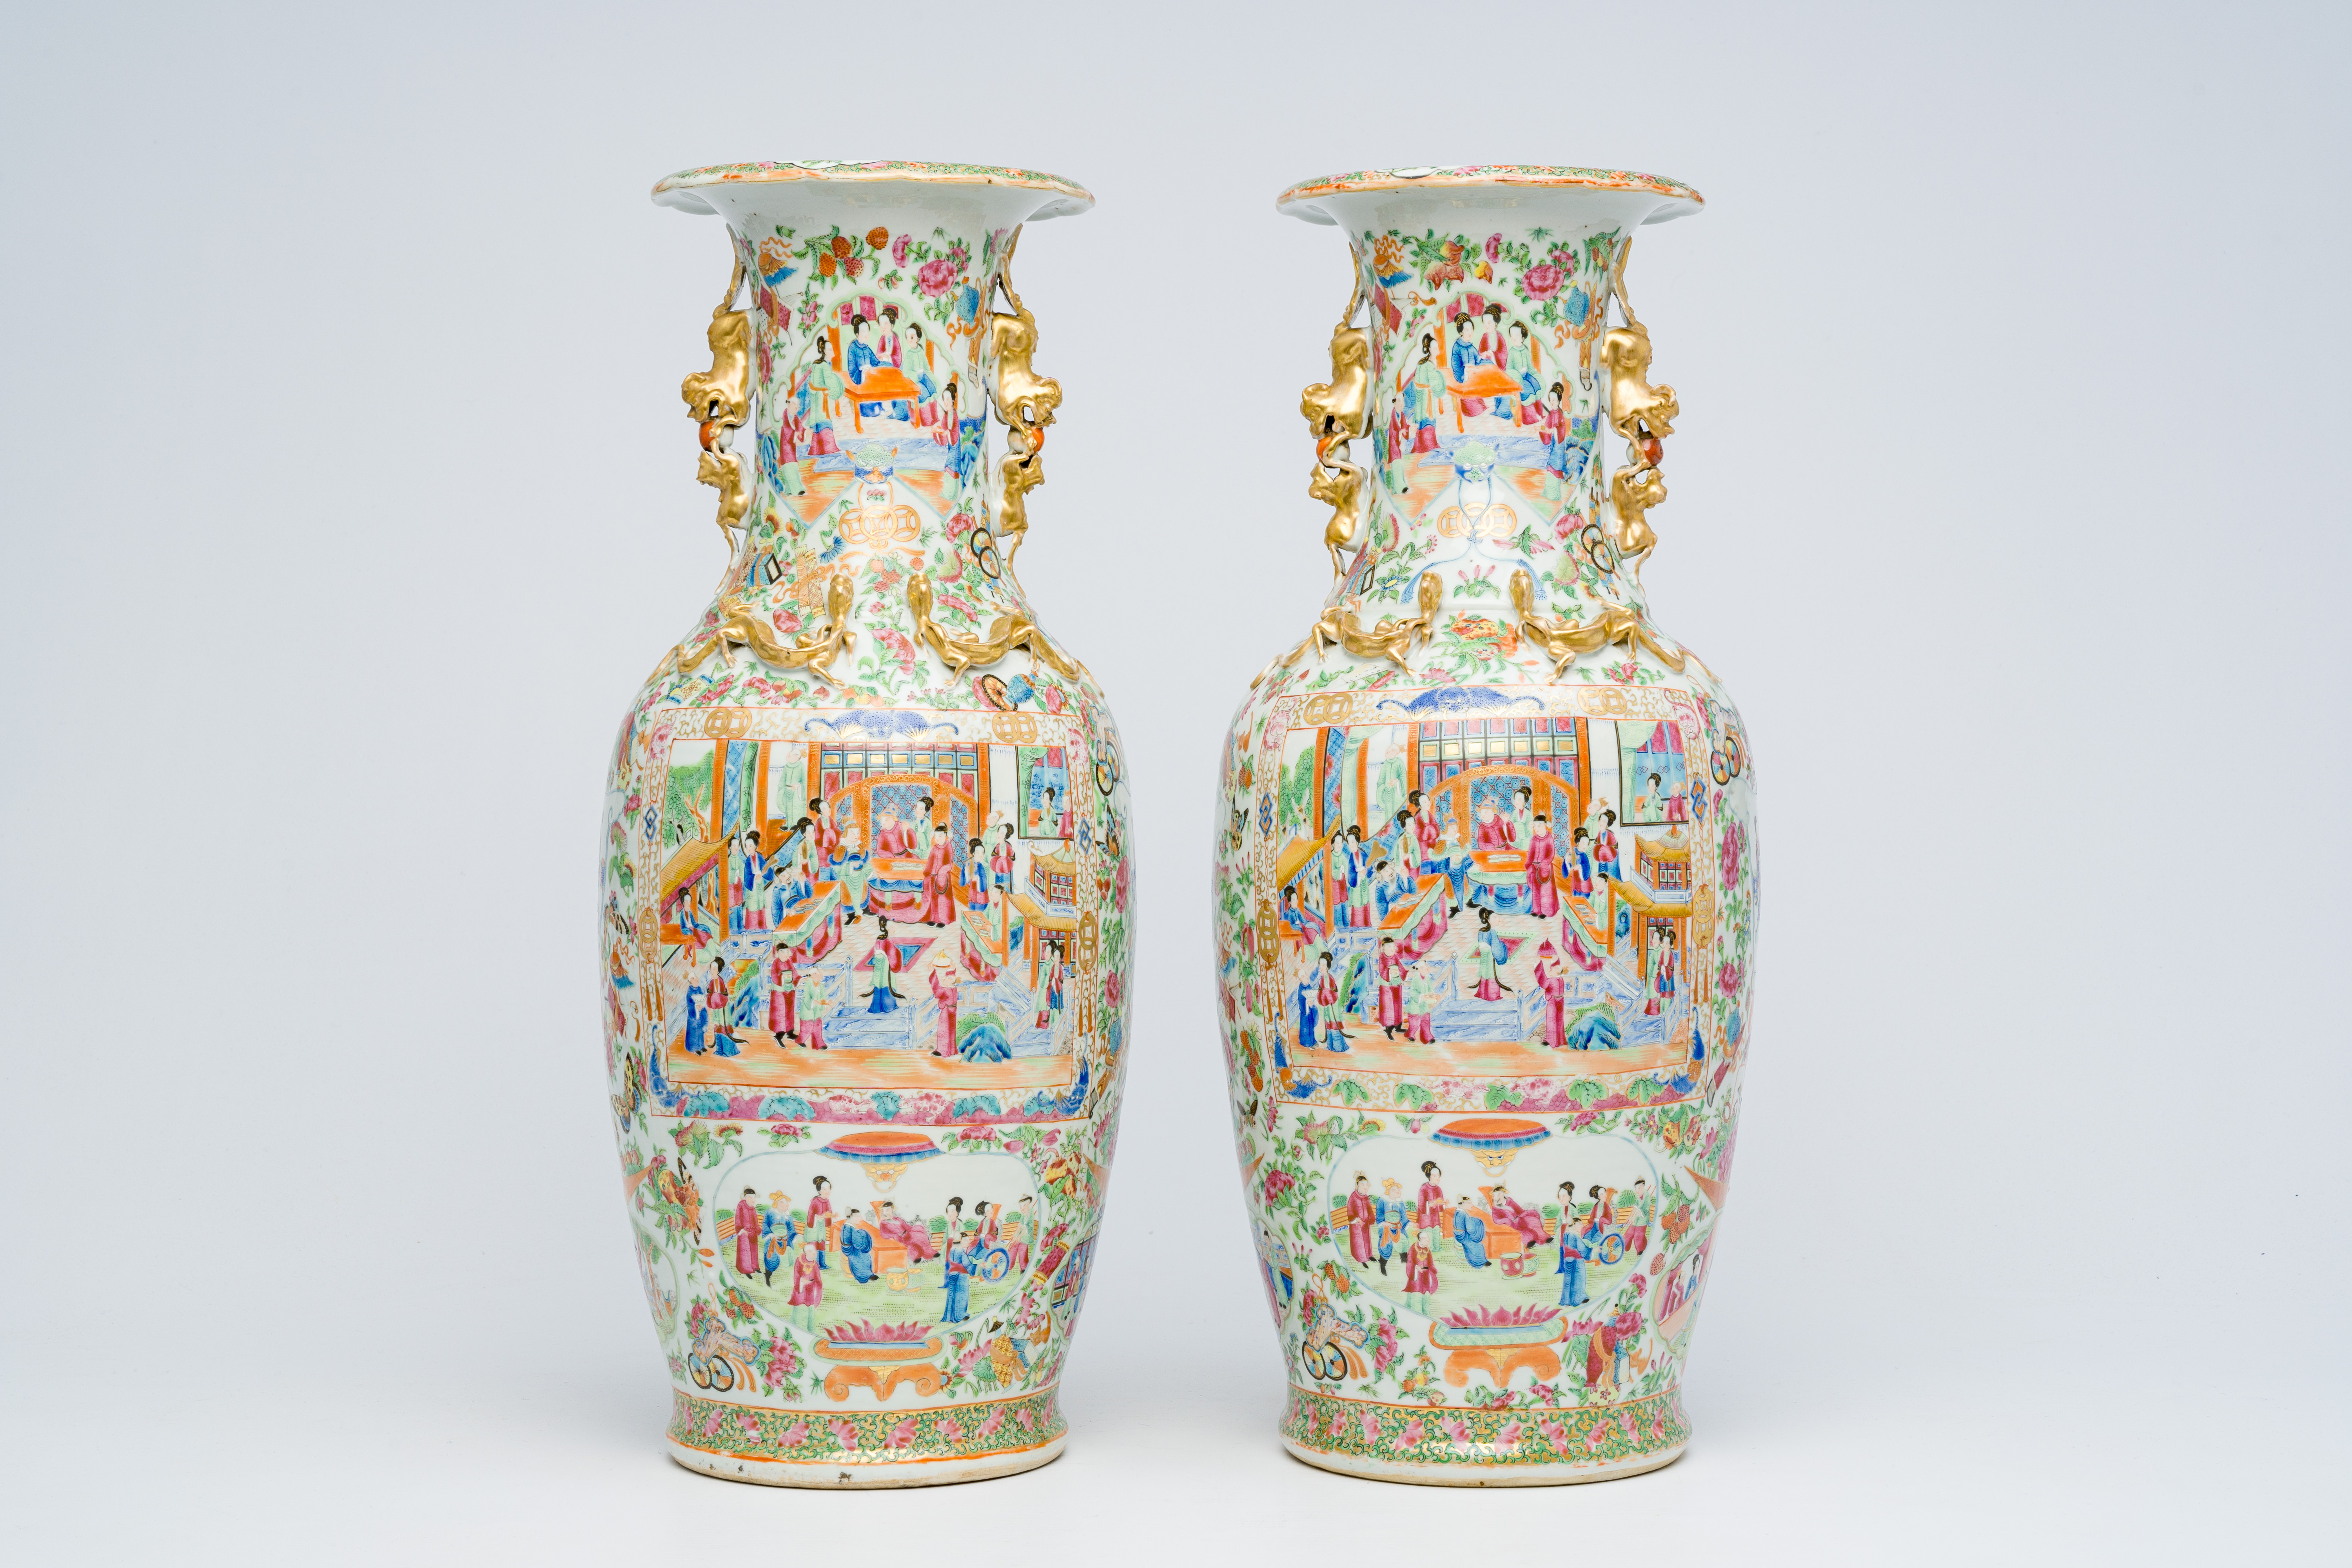 A pair of Chinese Canton famille rose vases with animated scenes, auspicious symbols and butterflies